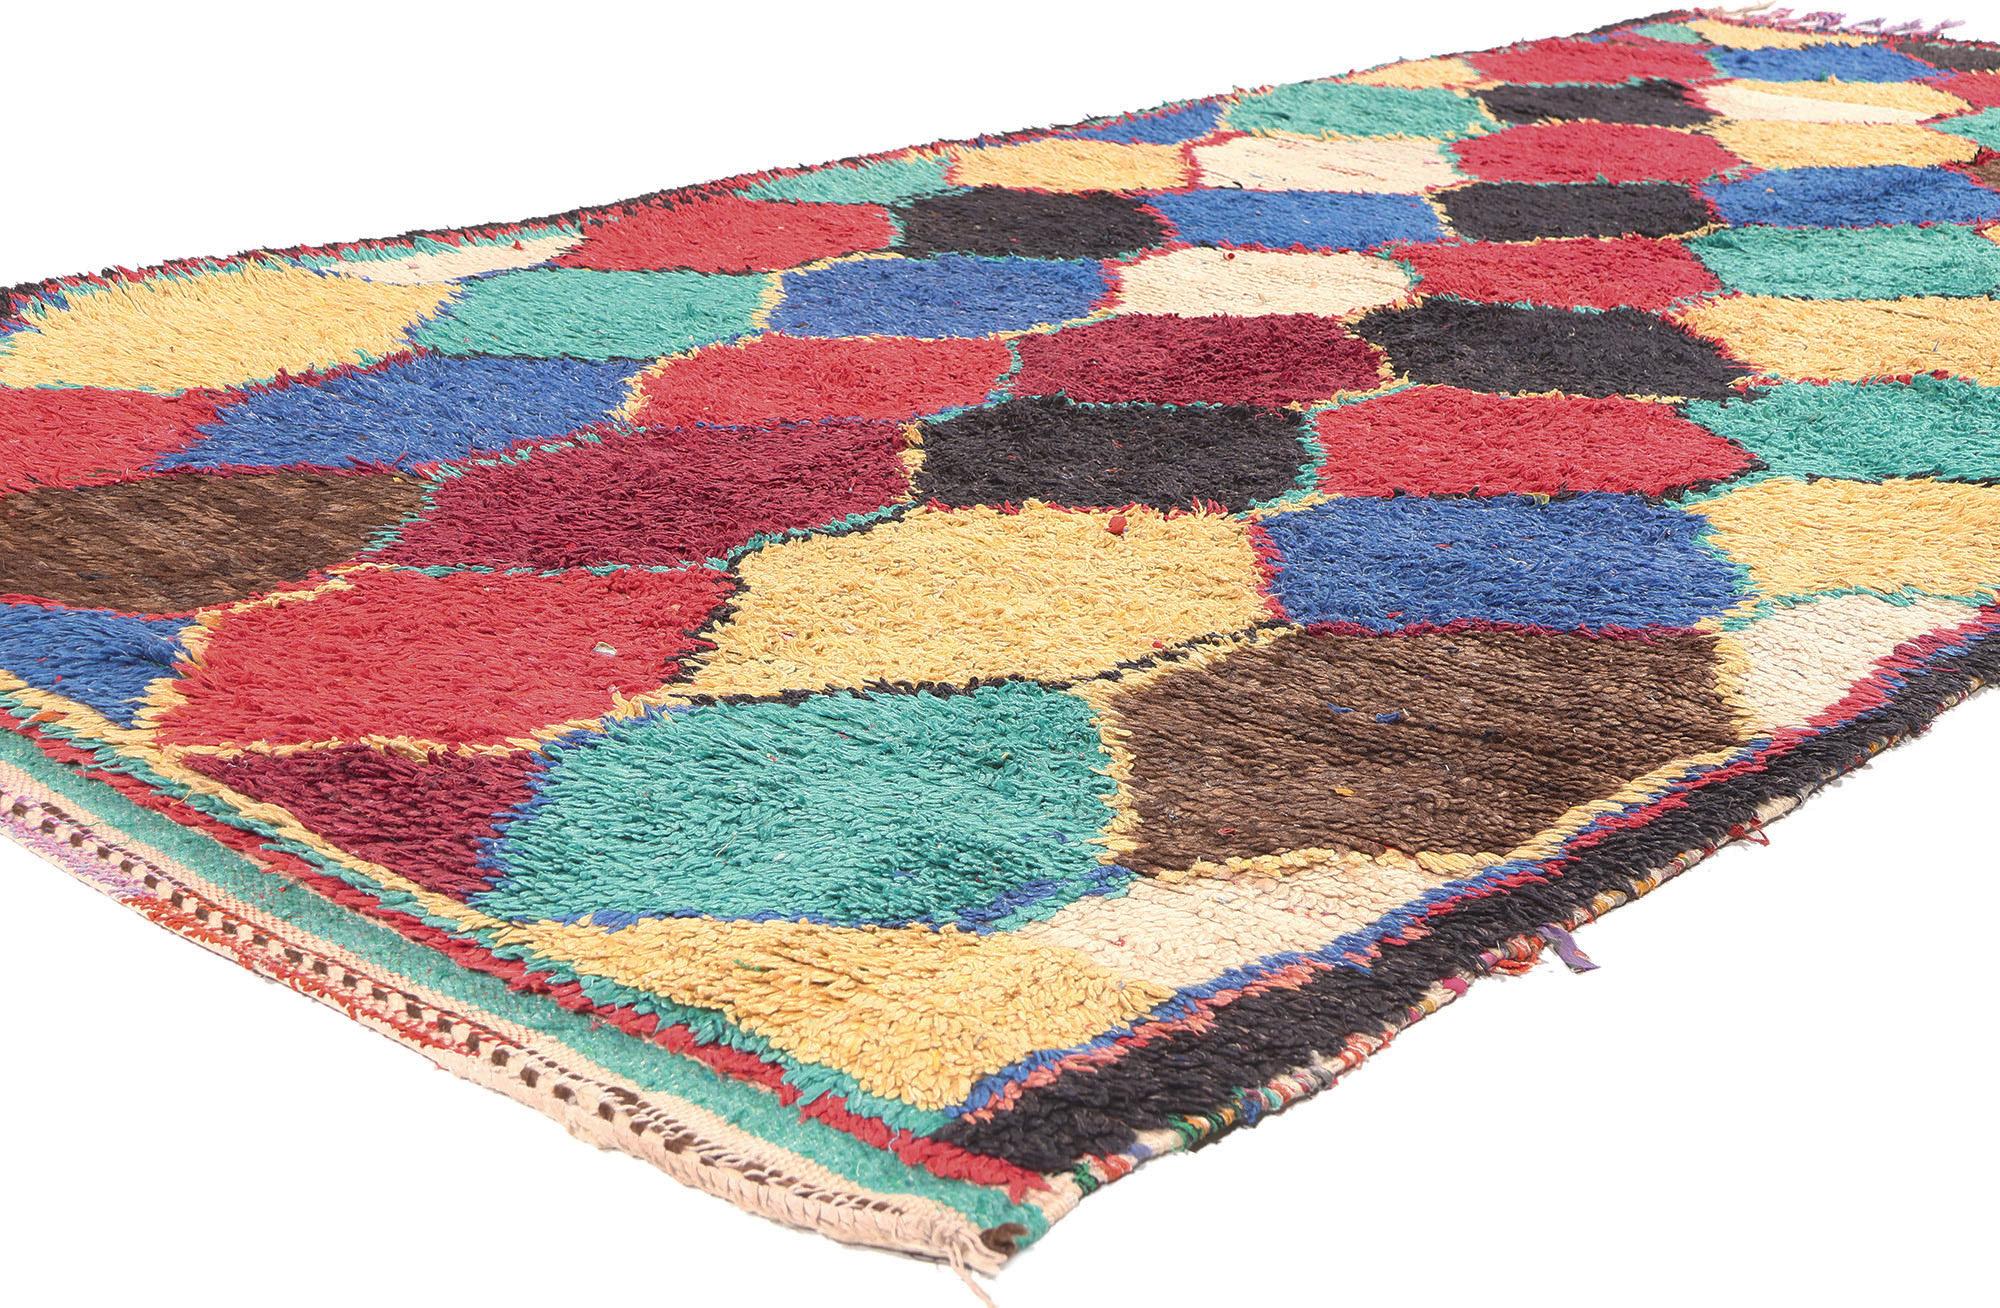 20371 Vintage Boucherouite Moroccan Rag Rug, 04'06 x 09'05. From the provincial capital of central Morocco in the High Atlas Mountains emerges the vibrant legacy of Azila rugs, a distinctive type of Berber rug celebrated for its geometric precision